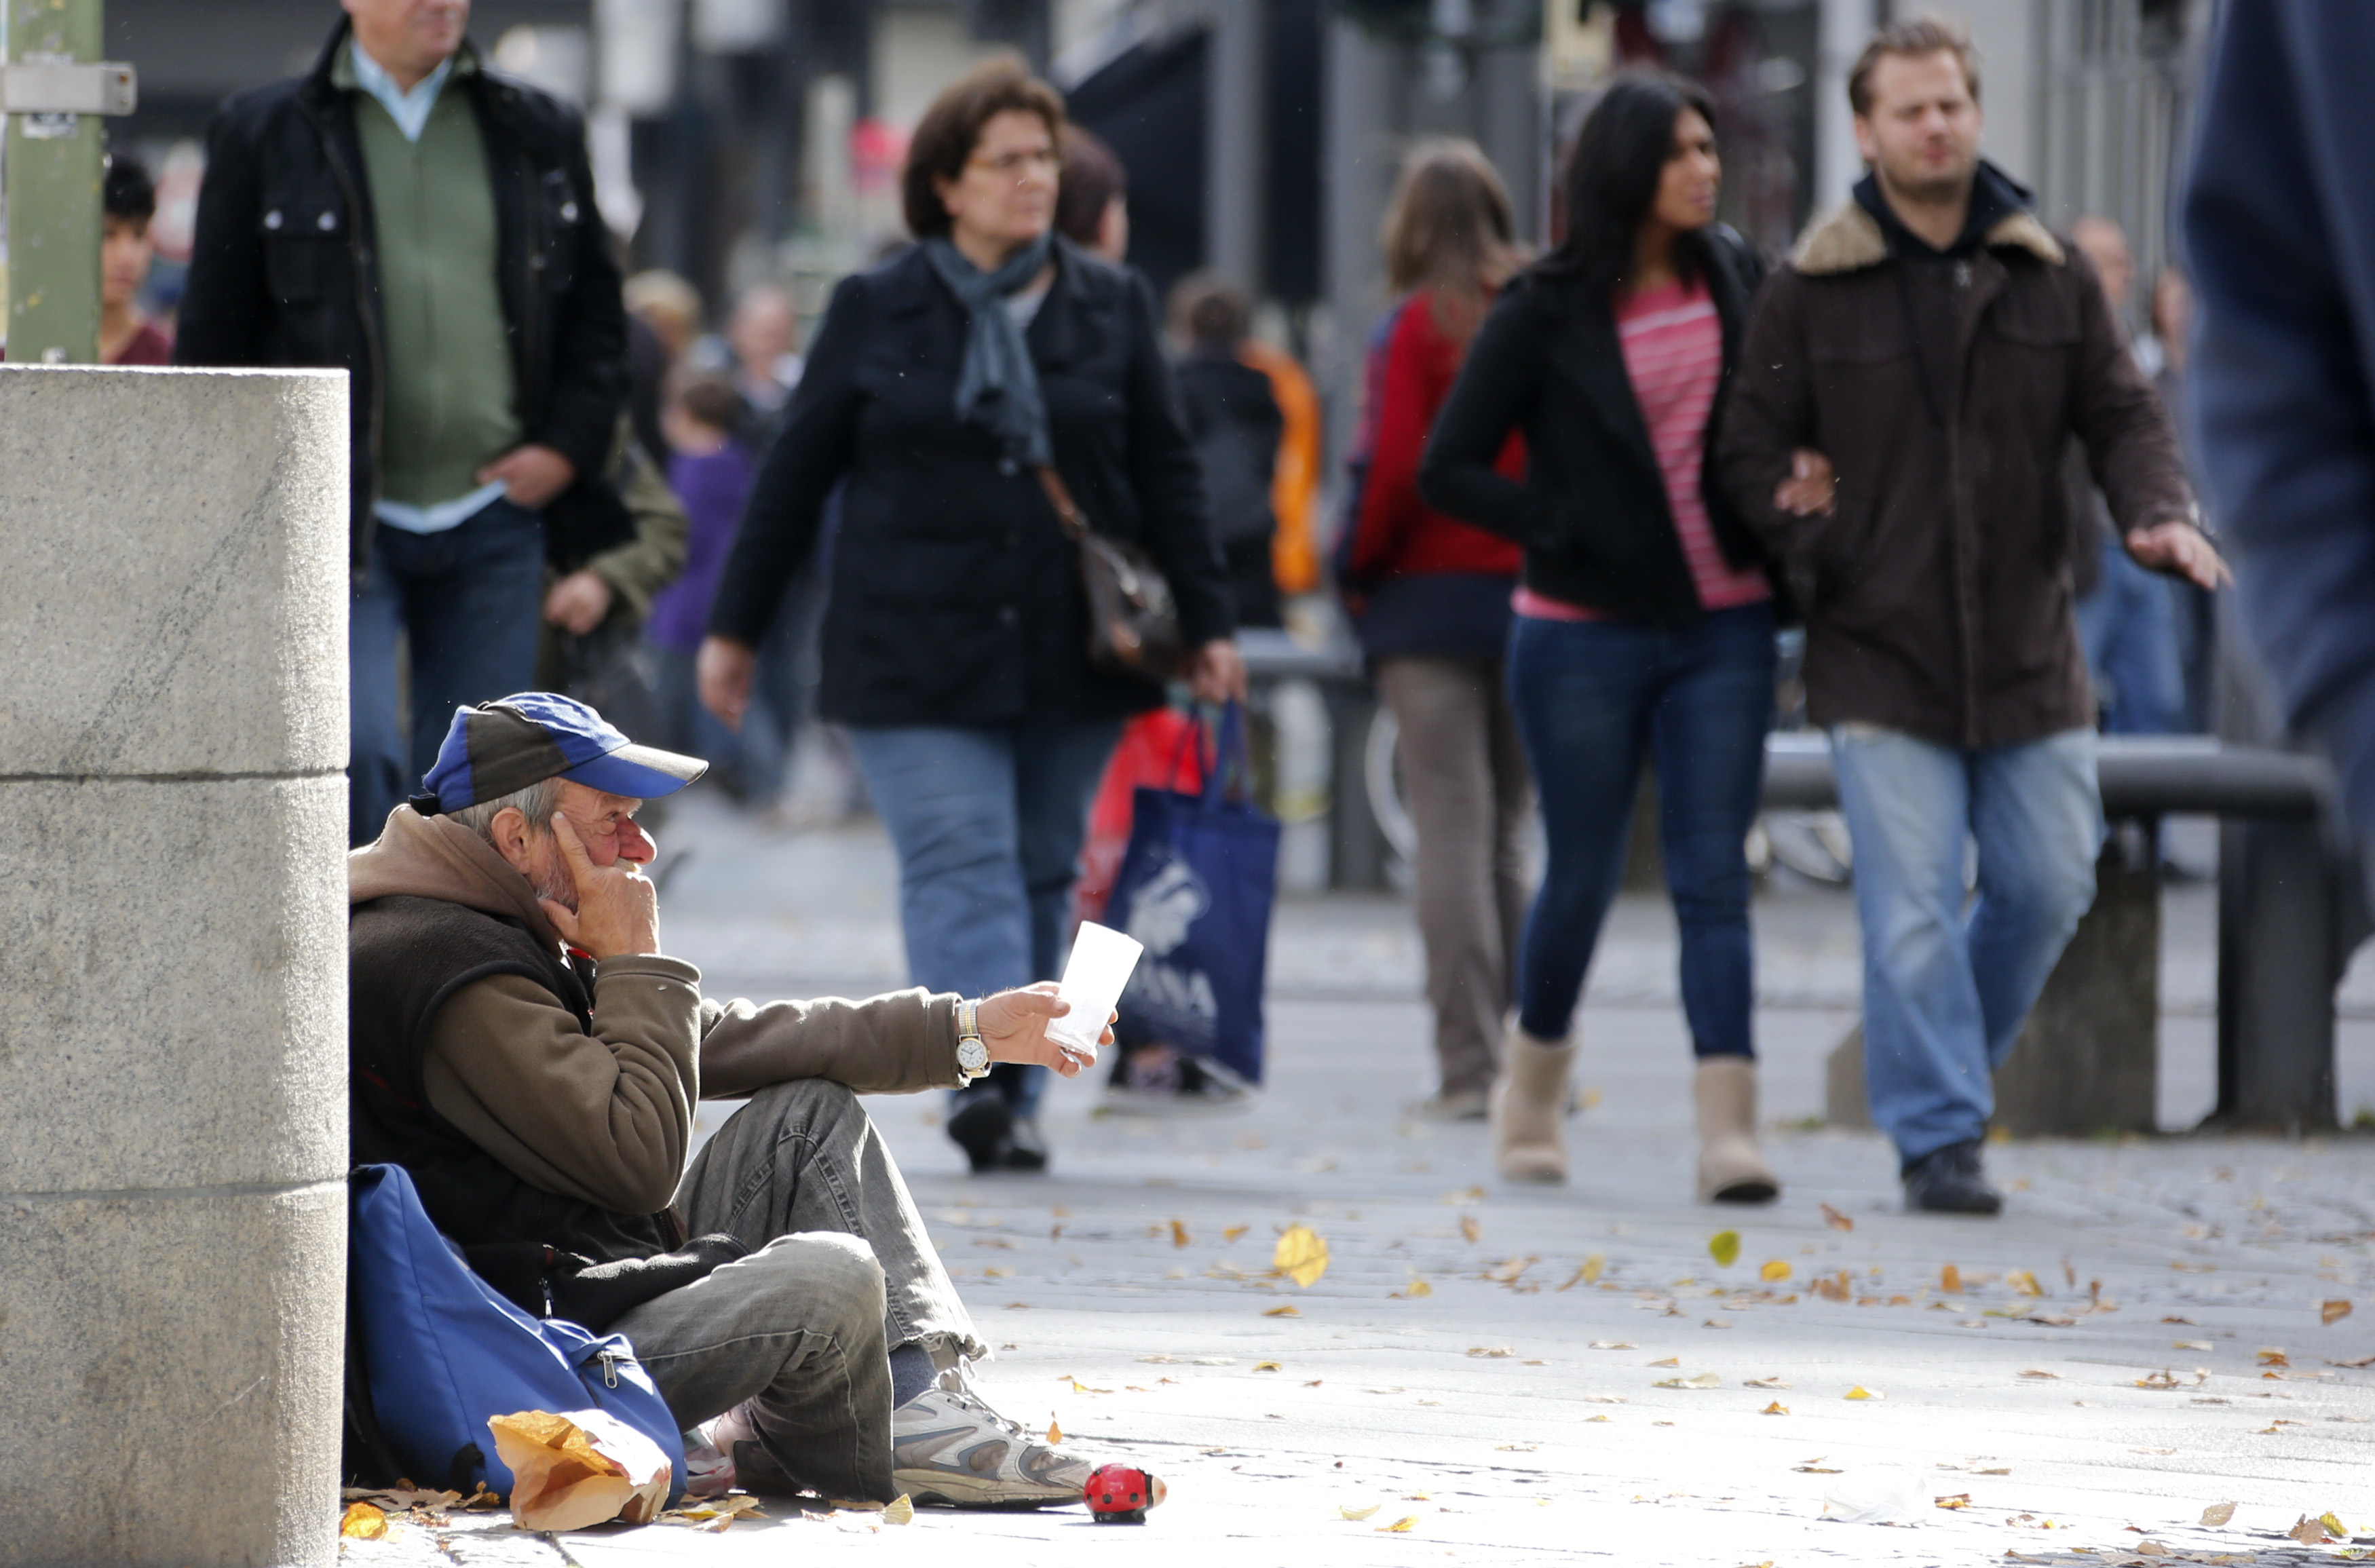 A man begs as pedestrians walk past at Wilmersdorfer shopping street in Berlin October 9, 2012.      REUTERS/Fabrizio Bensch (GERMANYSOCIETY BUSINESS - Tags: SOCIETY BUSINESS EMPLOYMENT) - RTR38YEX